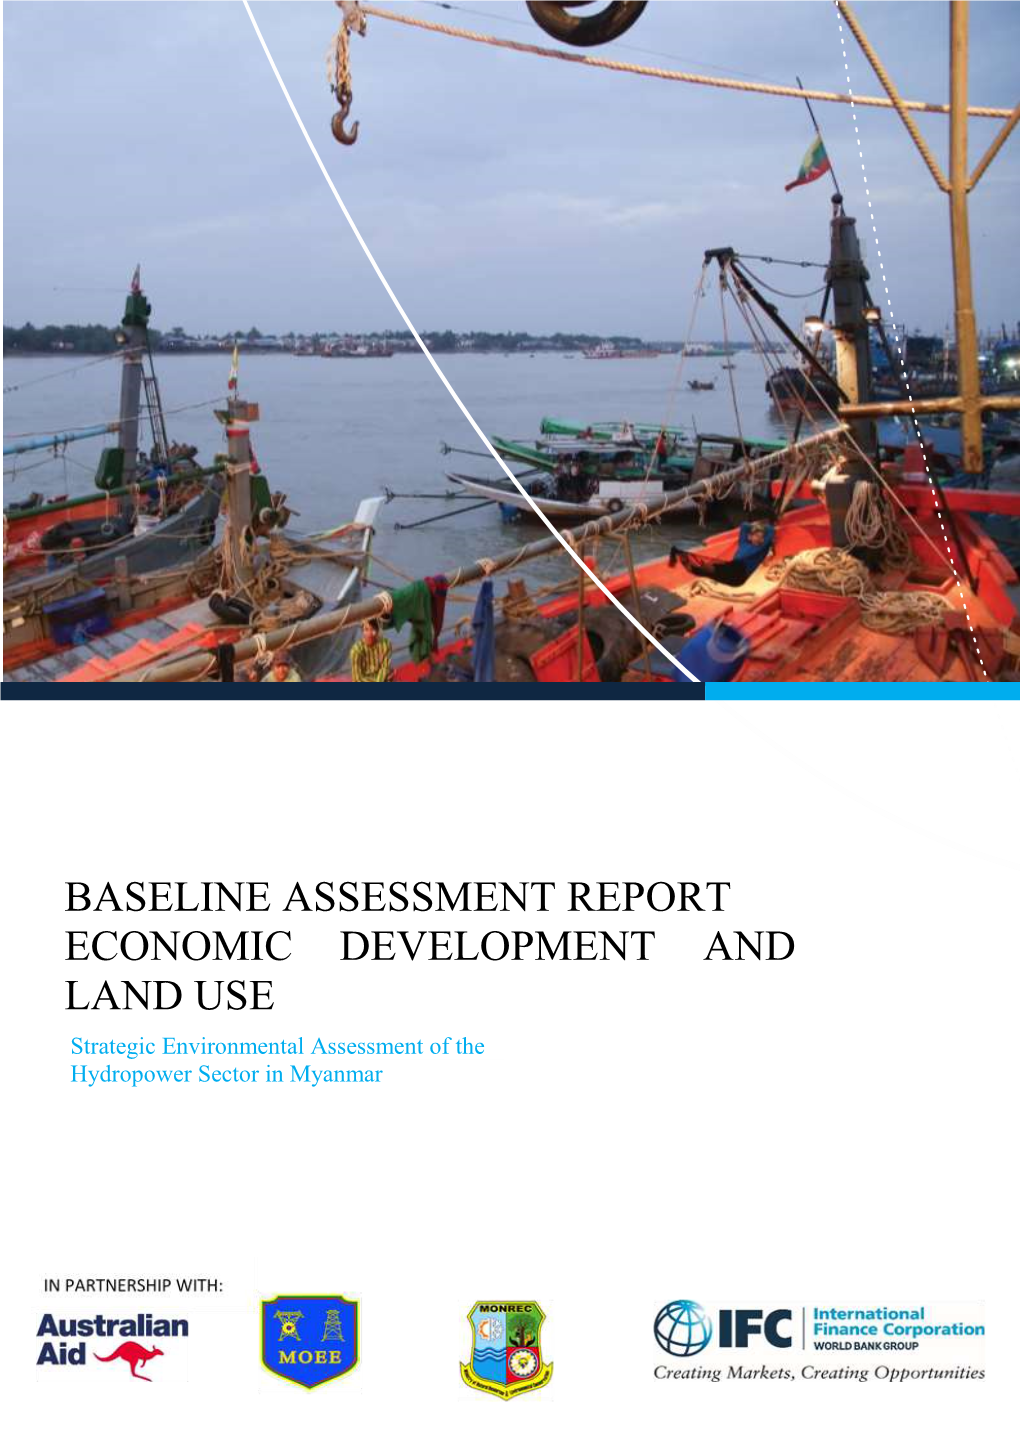 ECONOMIC DEVELOPMENT and LAND USE Strategic Environmental Assessment of the Hydropower Sector in Myanmar